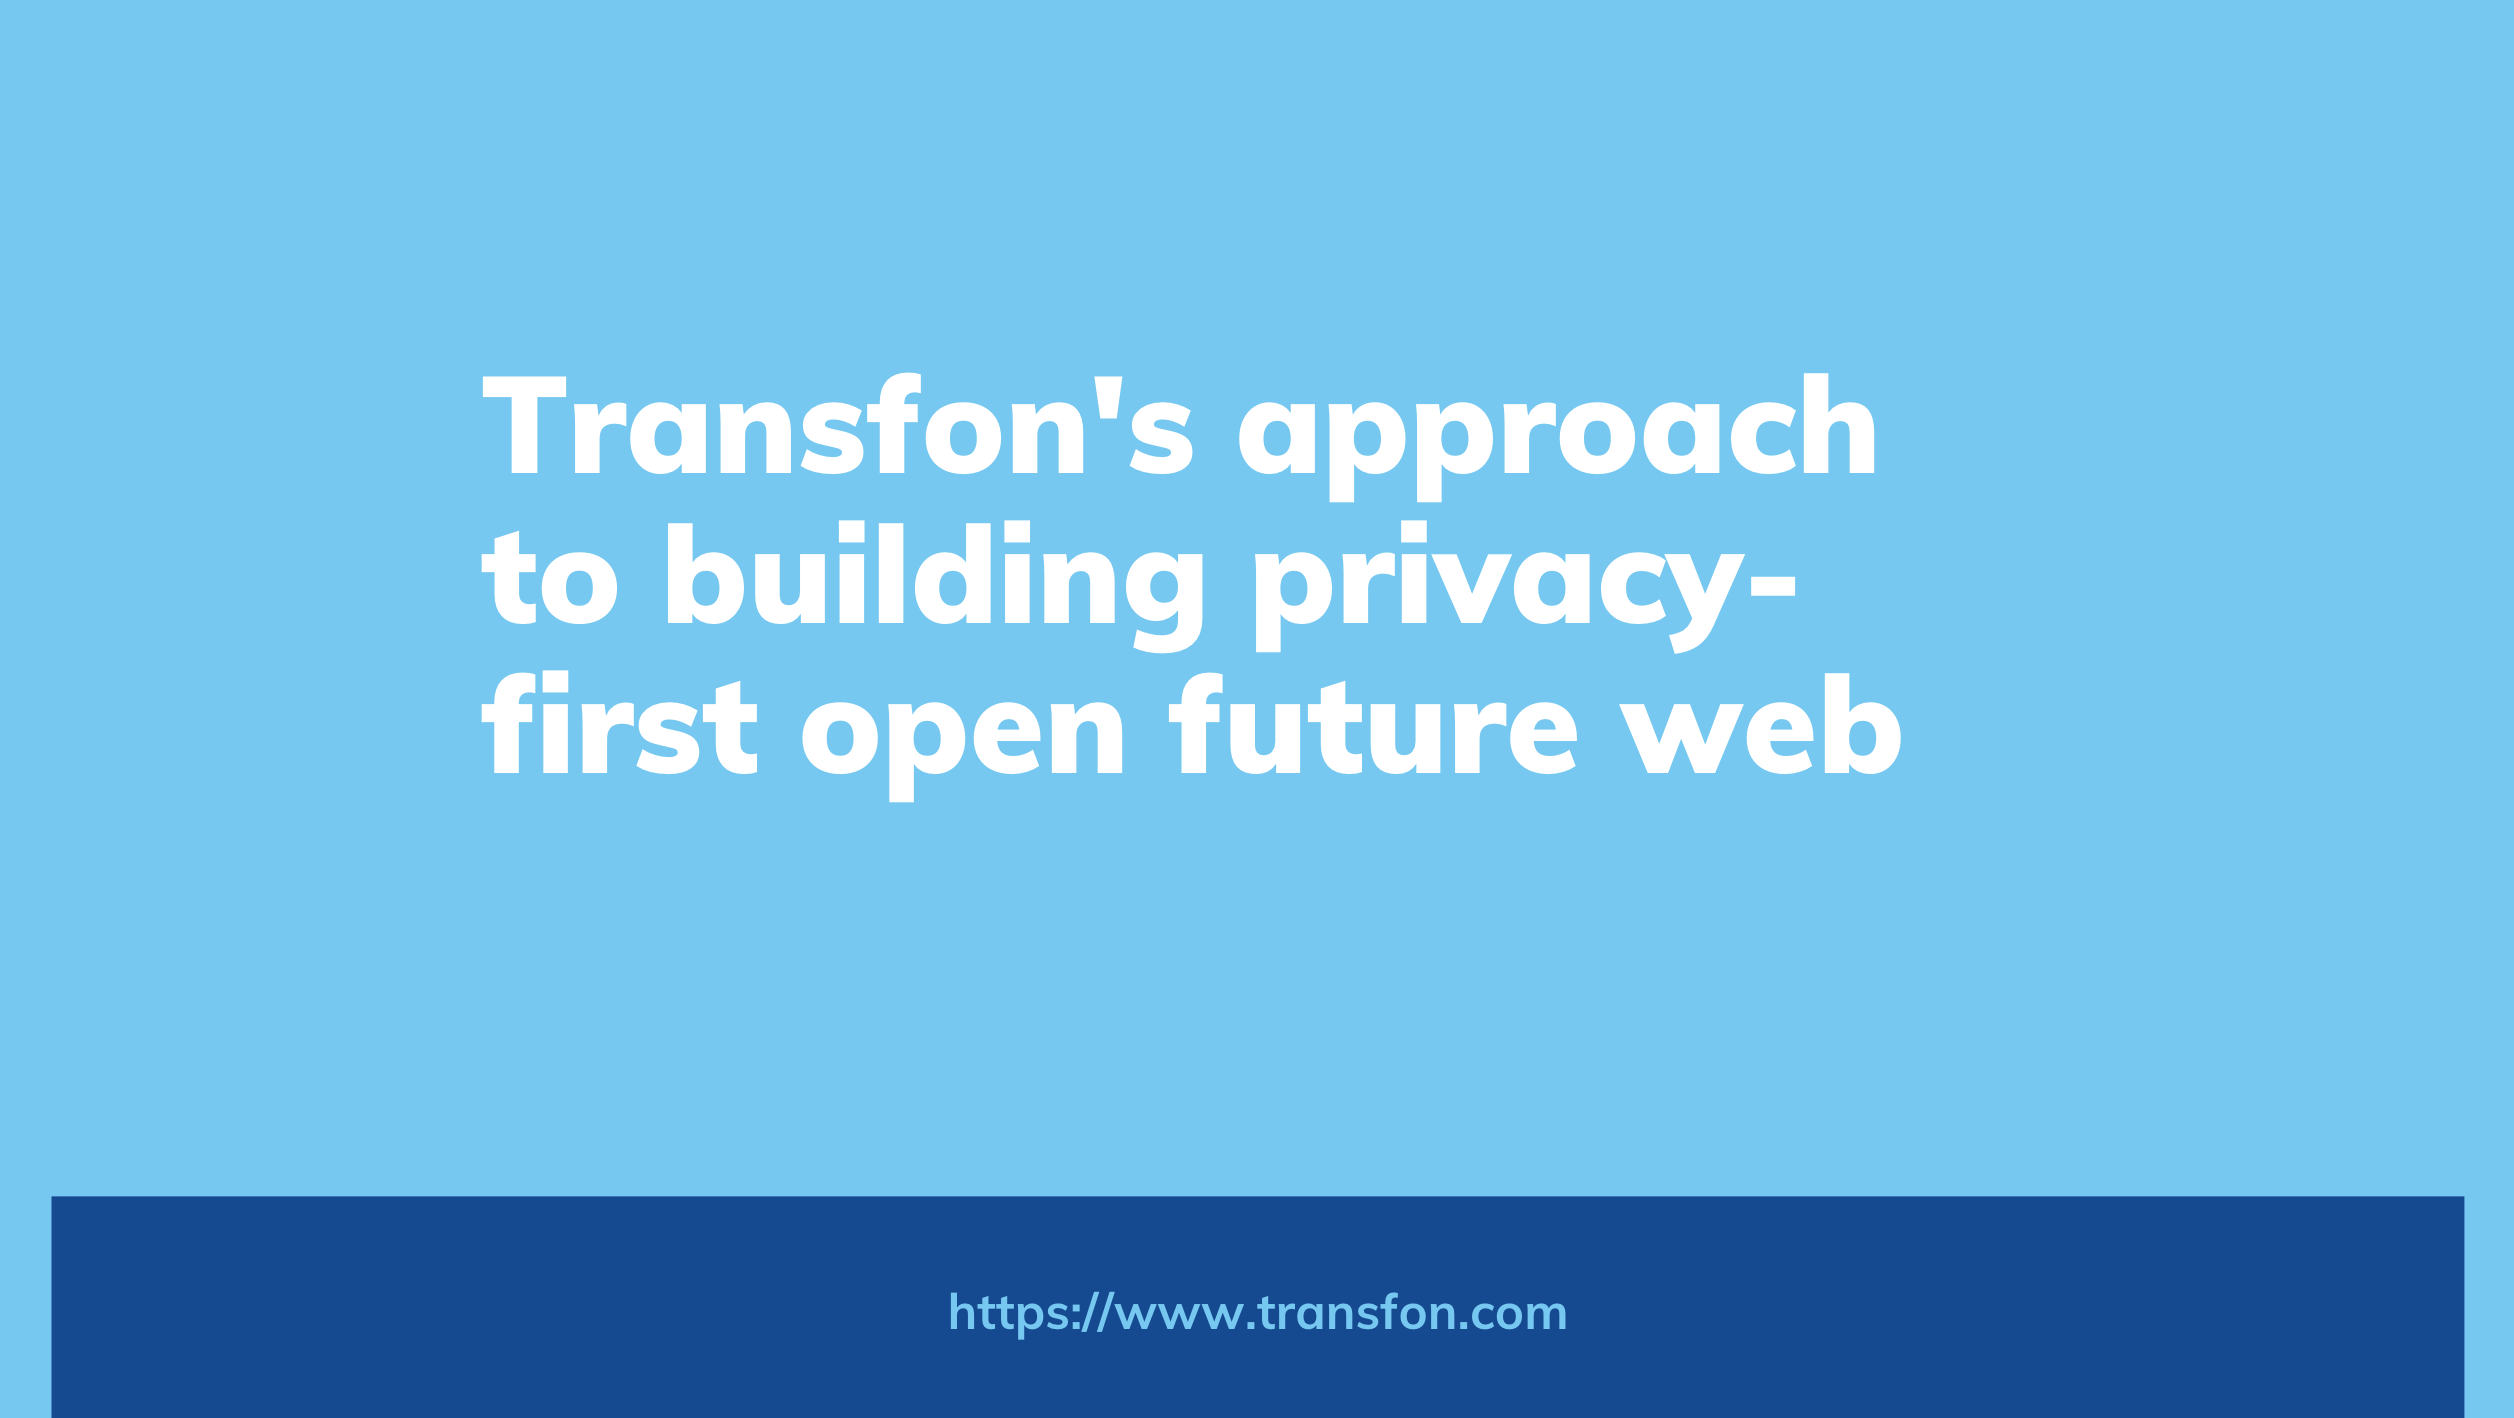 Transfon's approach to building privacy-first open future web